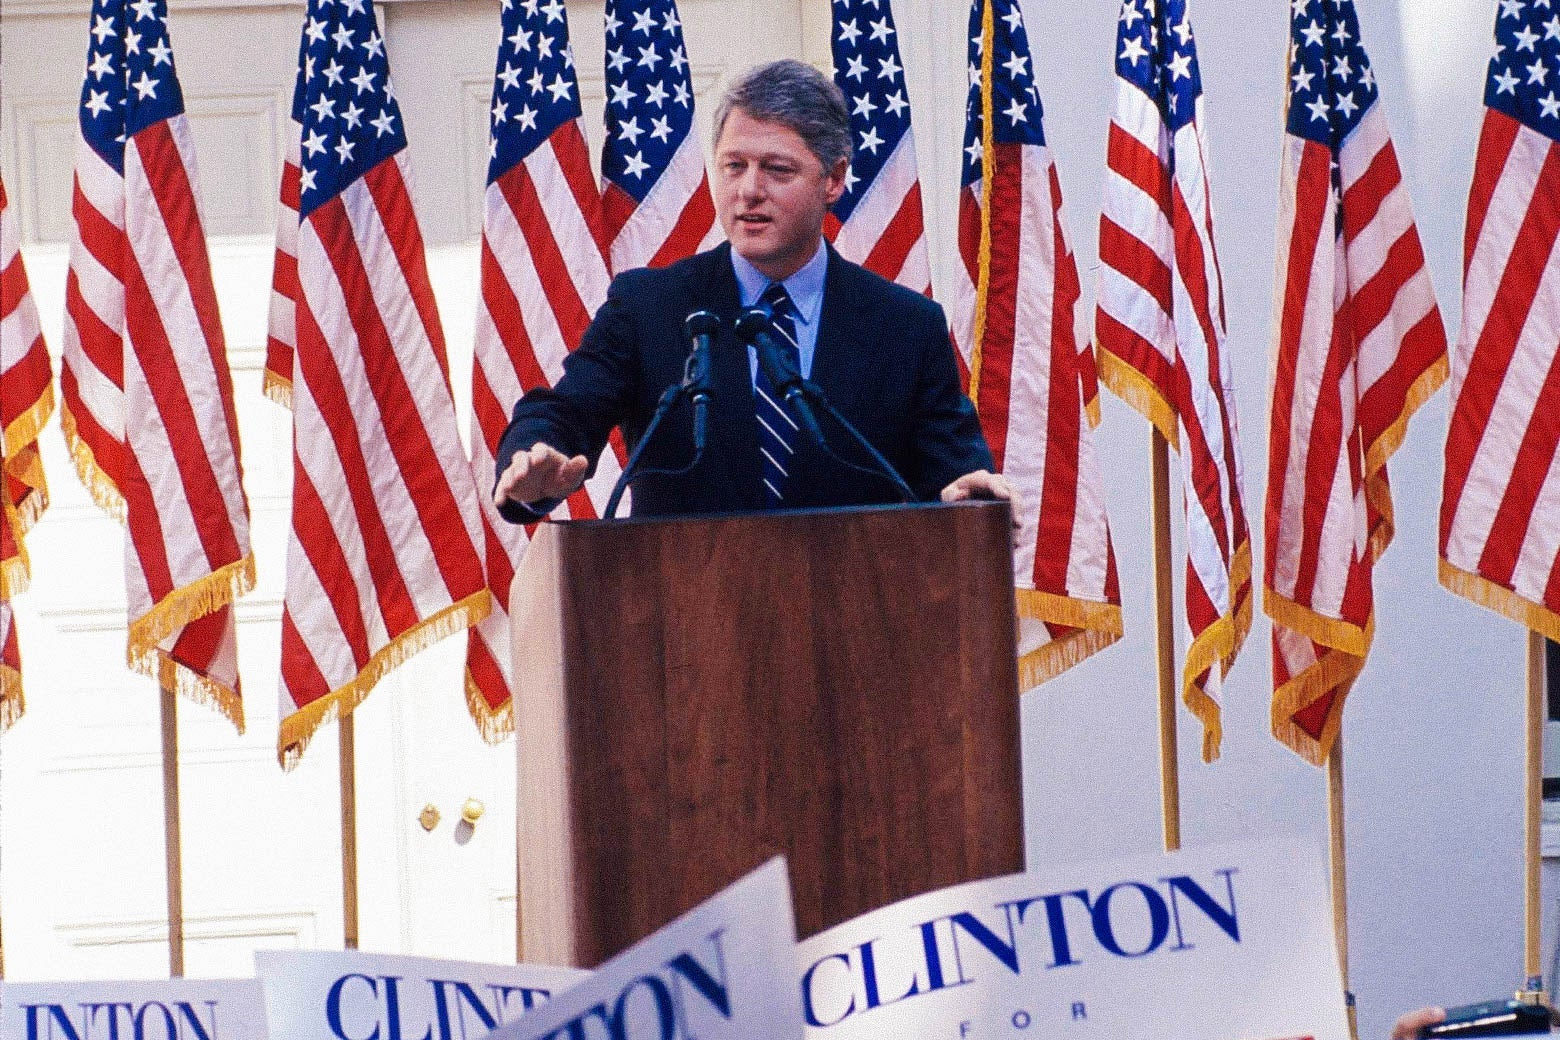 Bill Clinton standing at a podium with American flags behind him.